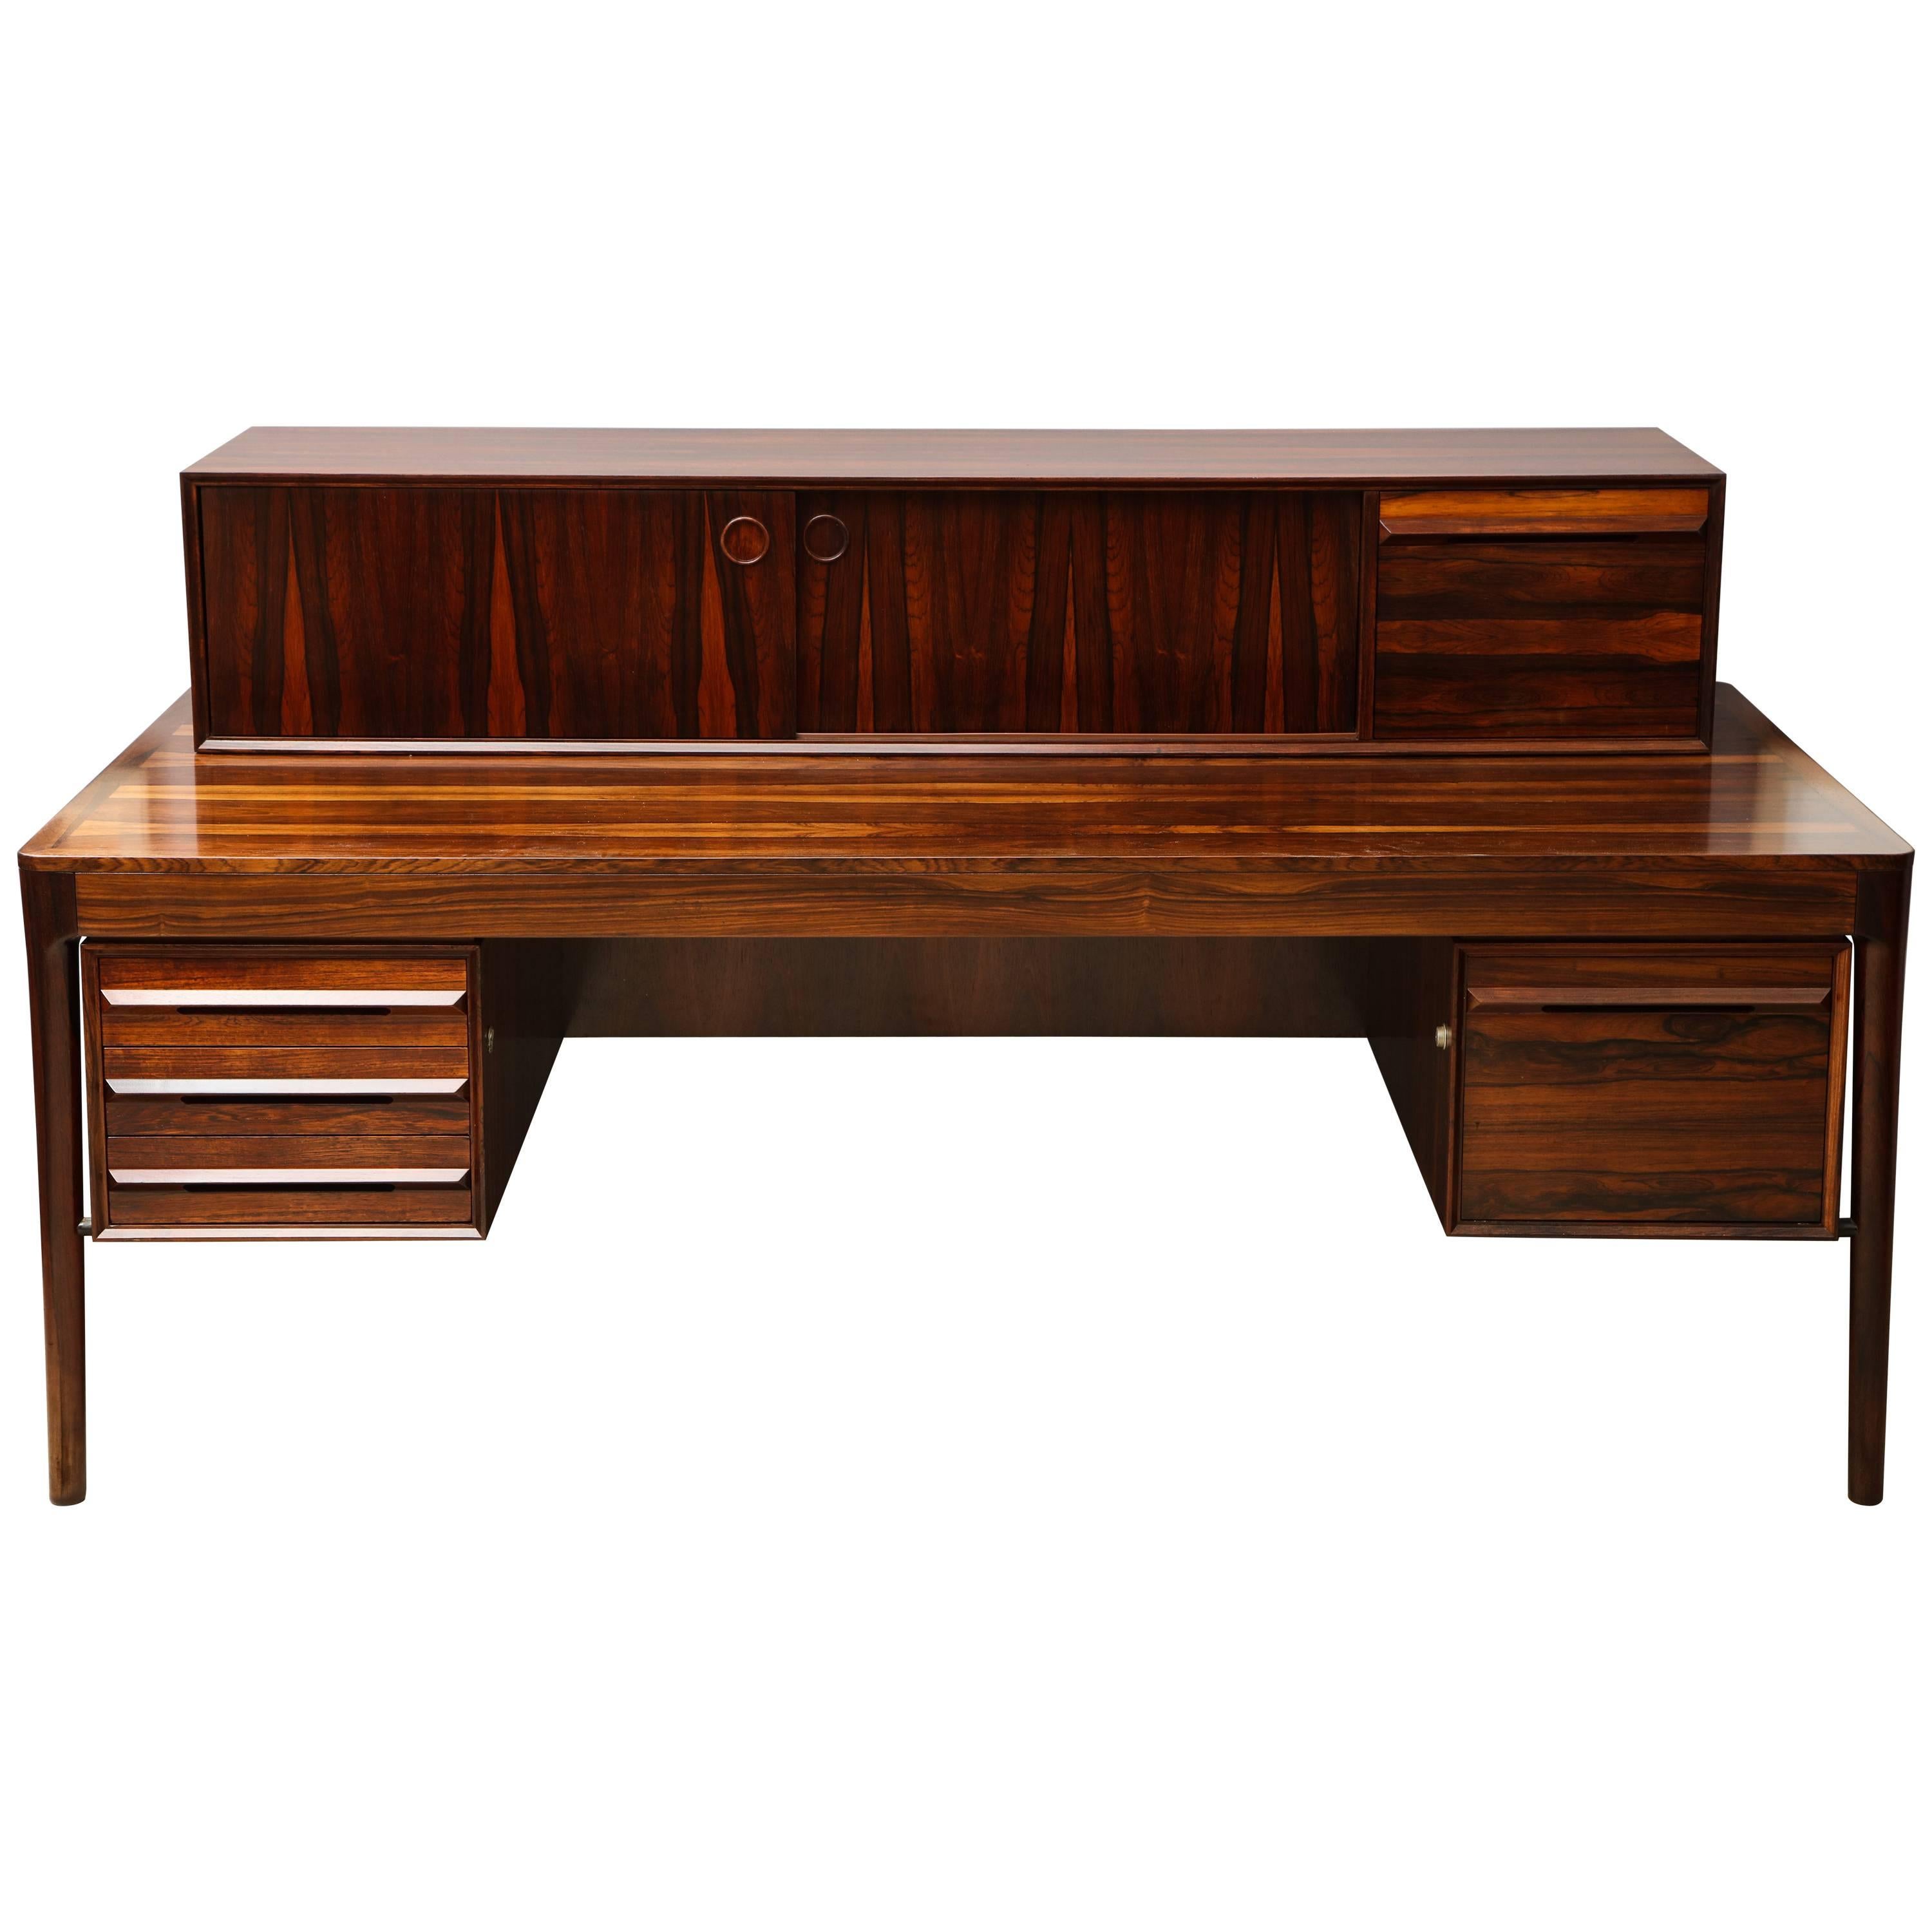 An exceptional and large rosewood desk made by Haug Snekkeri in Norway in the 1960s. The high contrast of the natural rosewood is dramatic and displays a beautiful pattern throughout. The lower left hand side with three drawers and lower right with